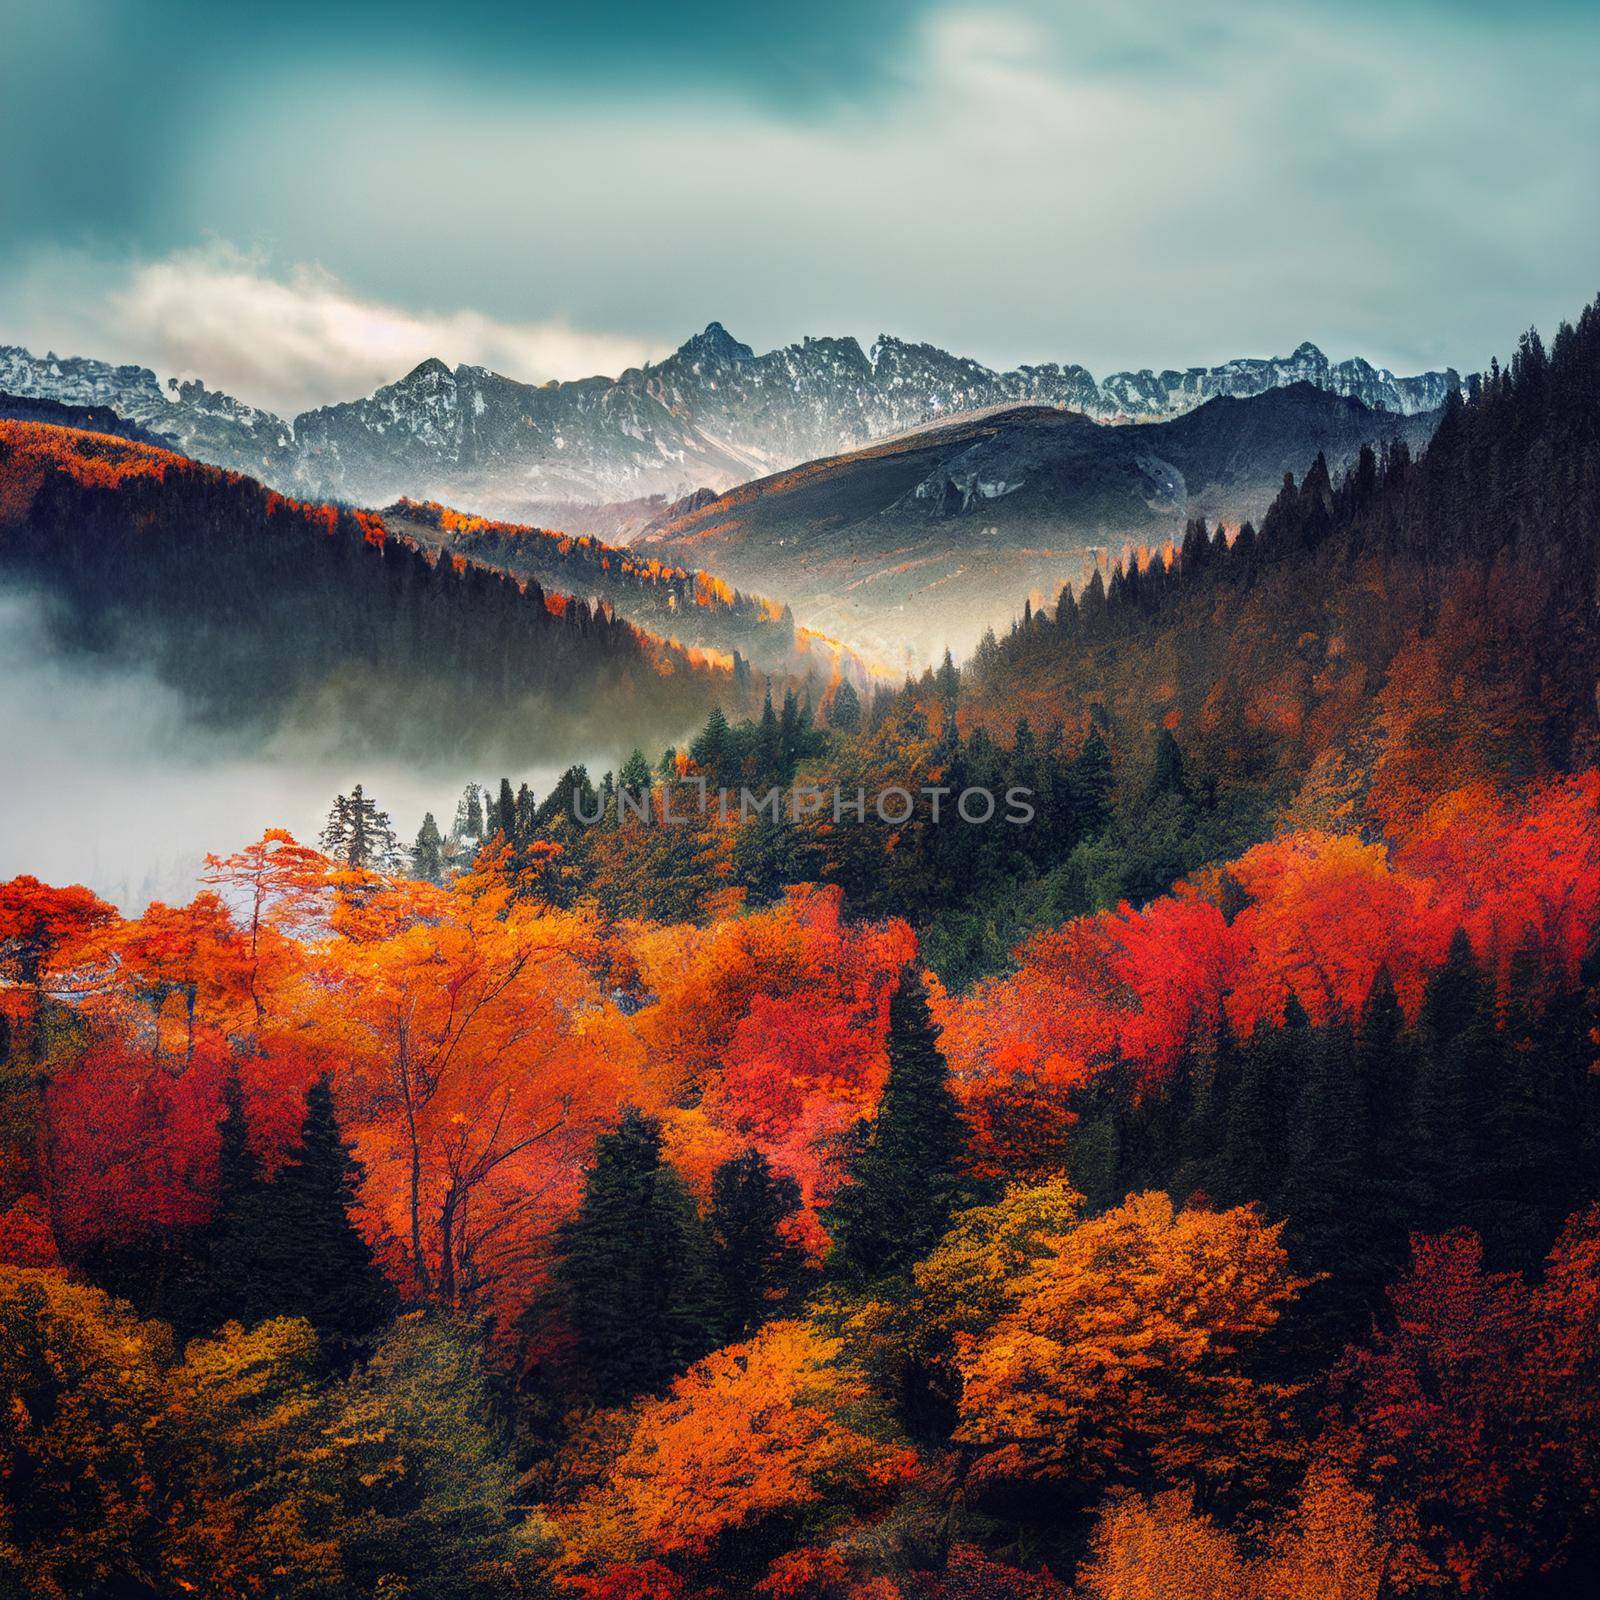 Autumn forest in the mountains by NeuroSky